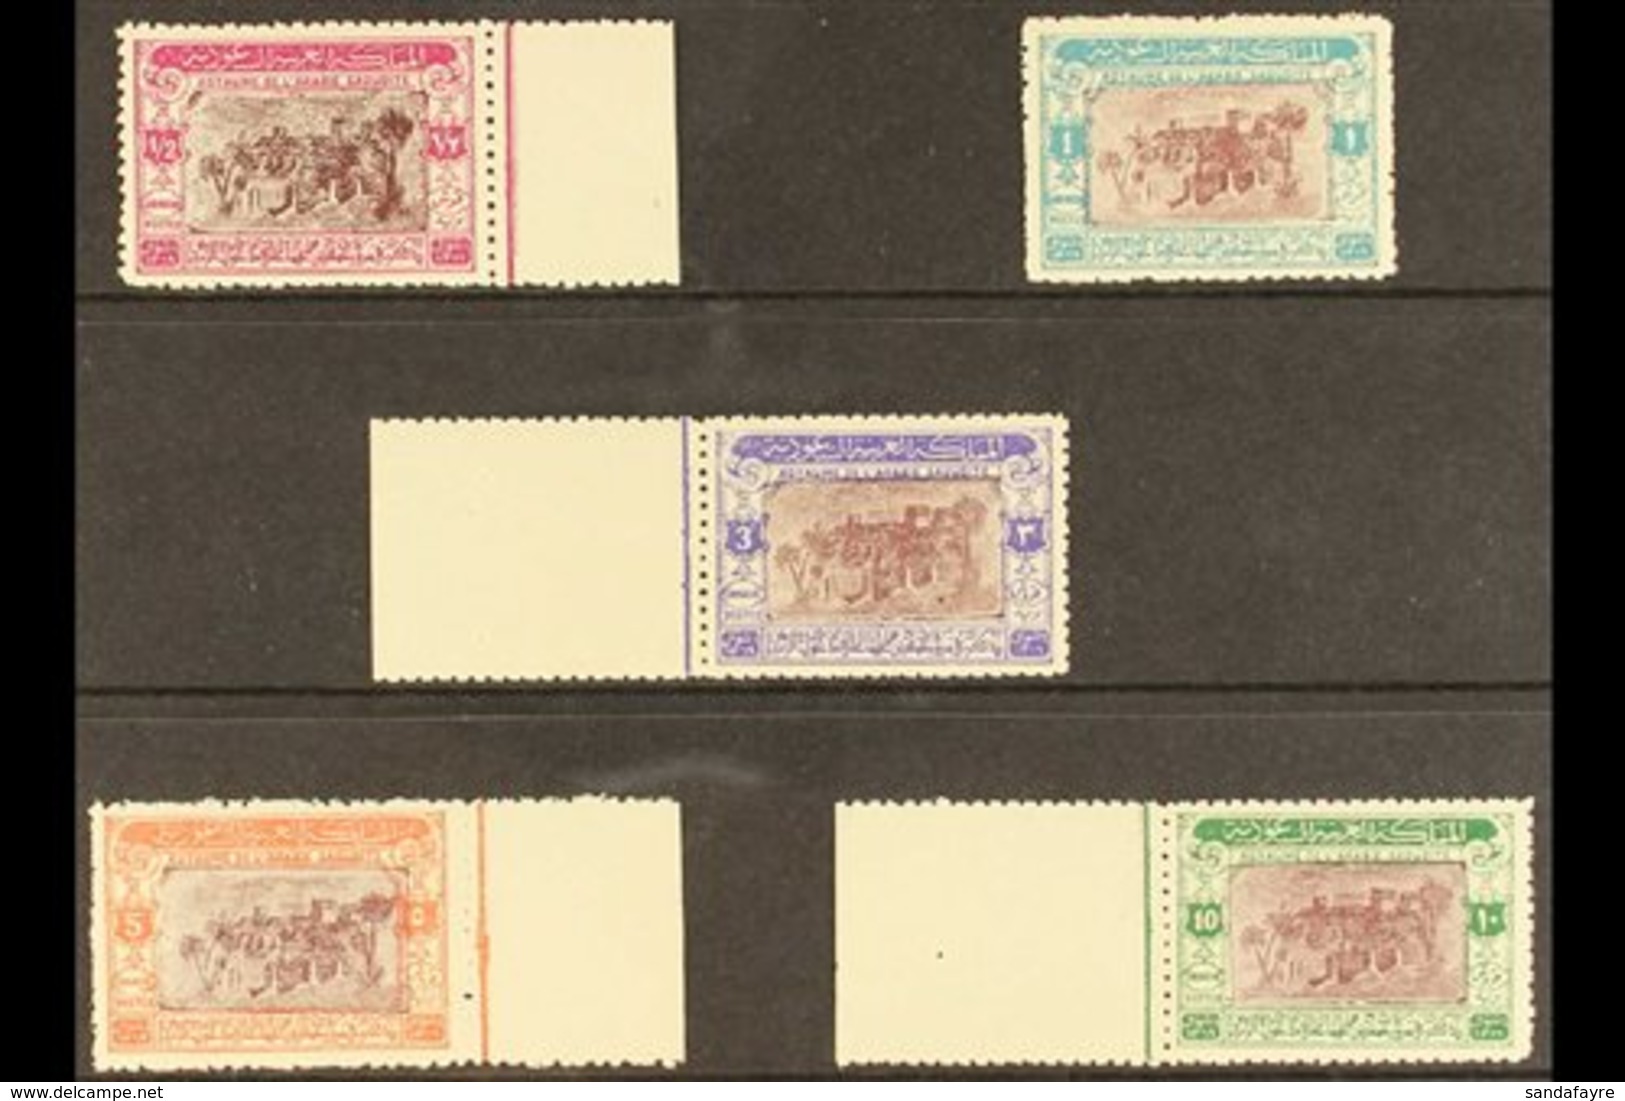 1950 50th Anniv Of Capture Of Riyadh, SG 365/369, Never Hinged Mint. (5 Stamps) For More Images, Please Visit Http://www - Saudi-Arabien